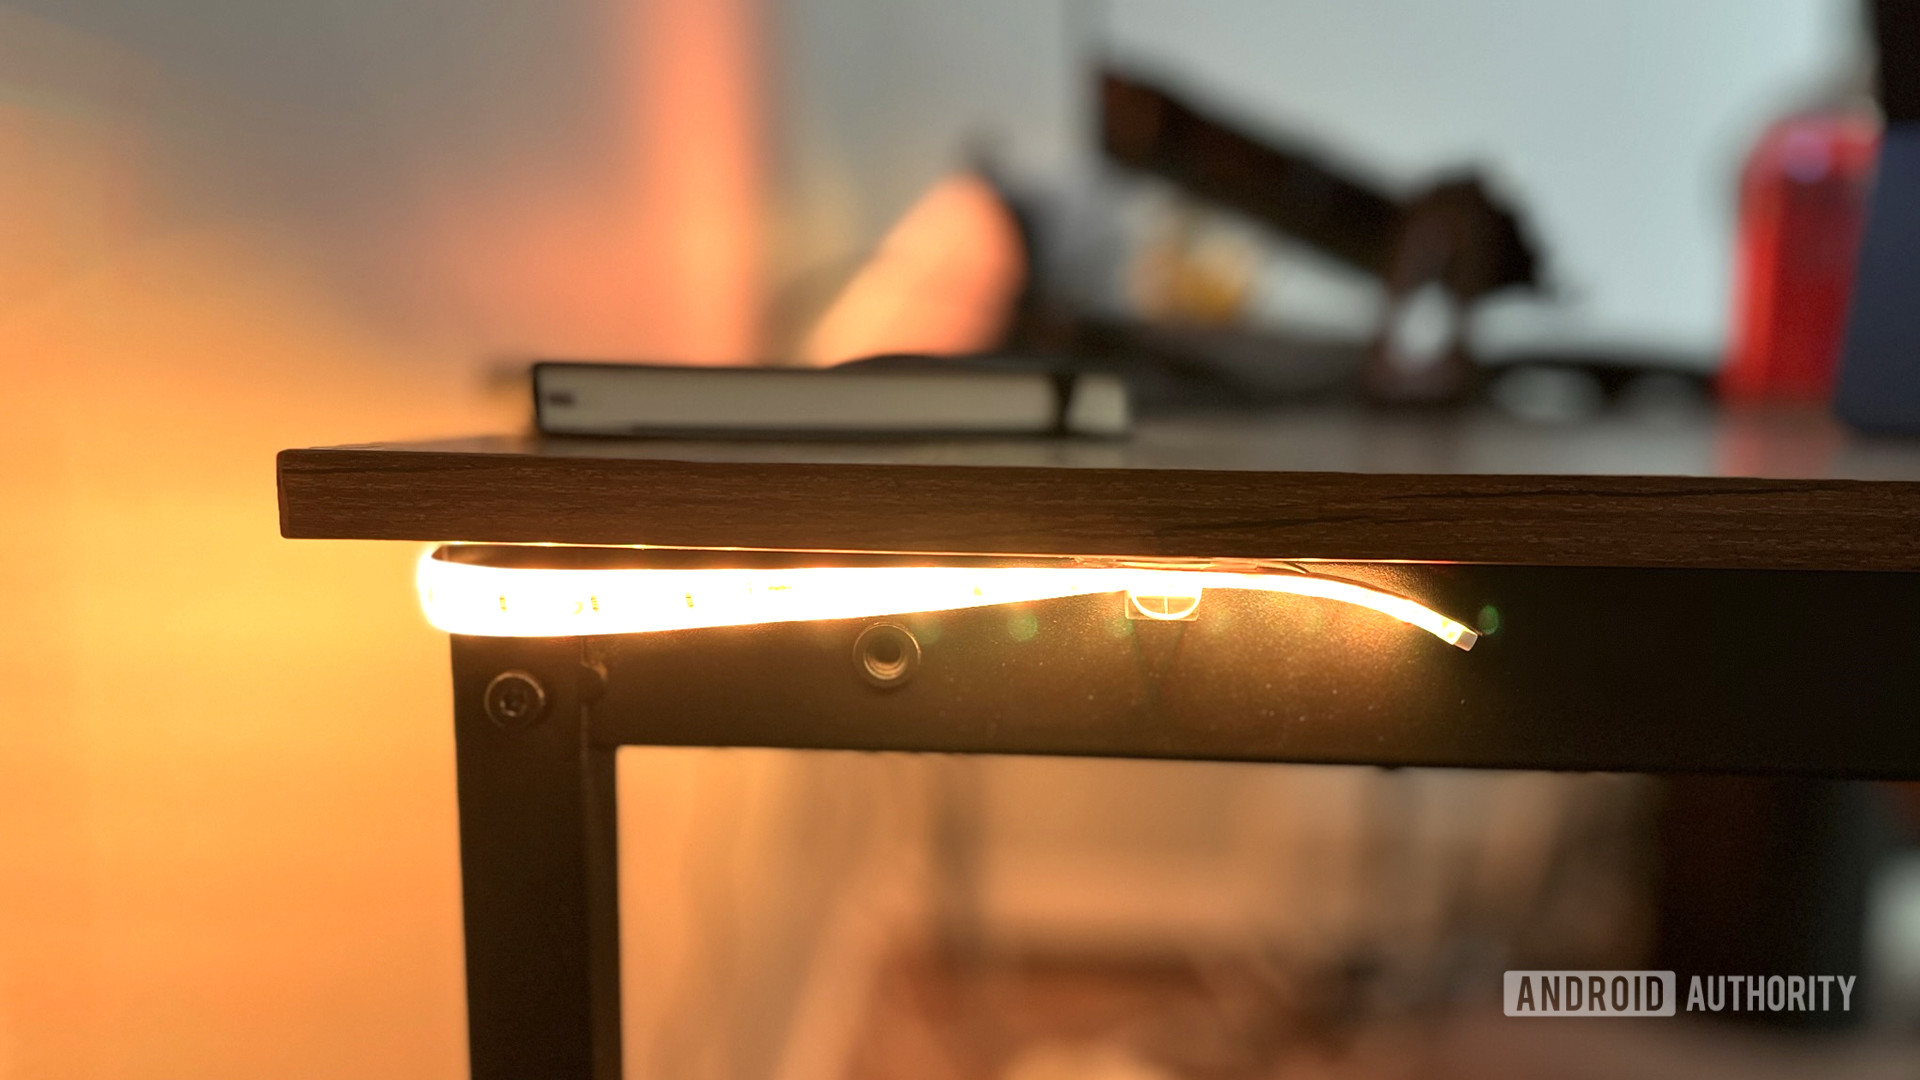 The Govee M1 Lightstrip is mounted on a table